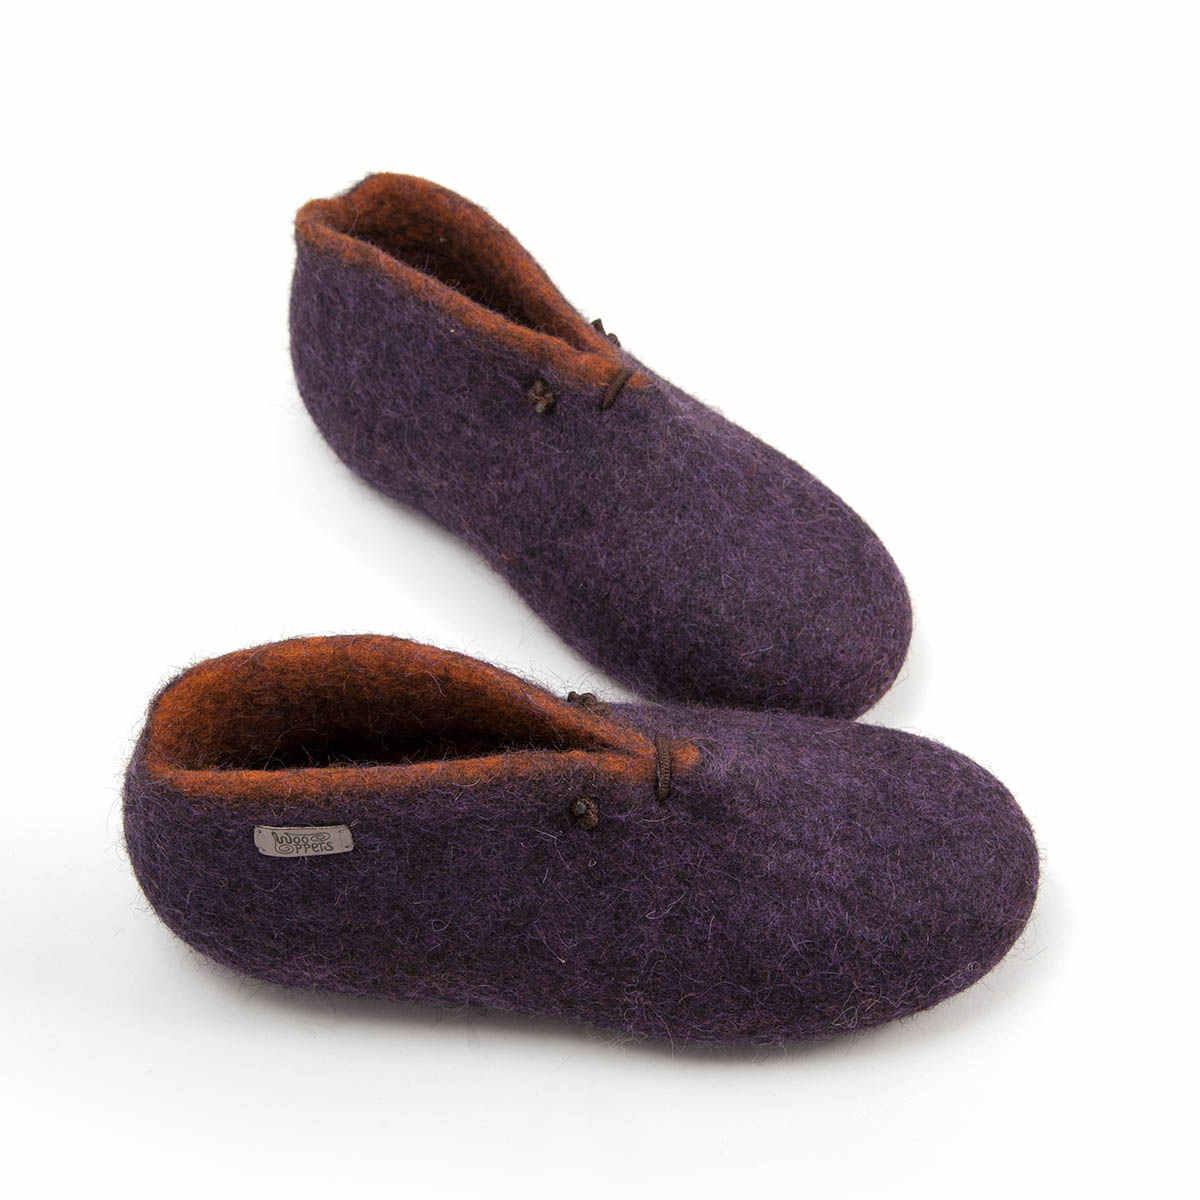 Ankle booties purple and rust brown Women's Slippers, Women's Slippers, BOOTIES